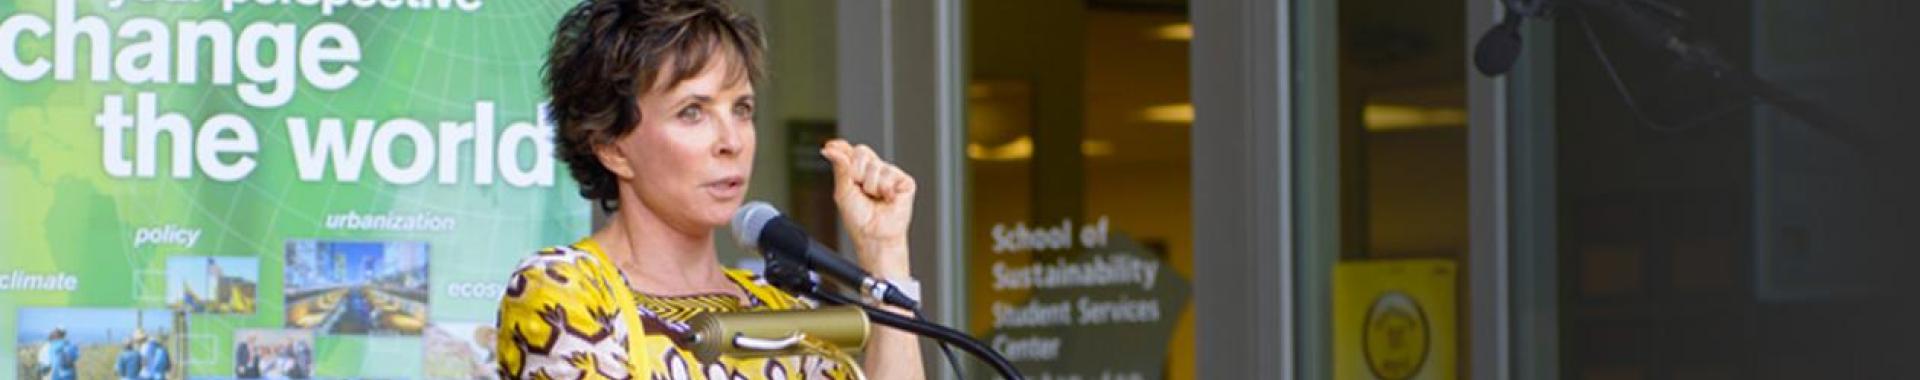 Julie Wrigley speaking in front of Wrigley Hall at ASU's Tempe campus